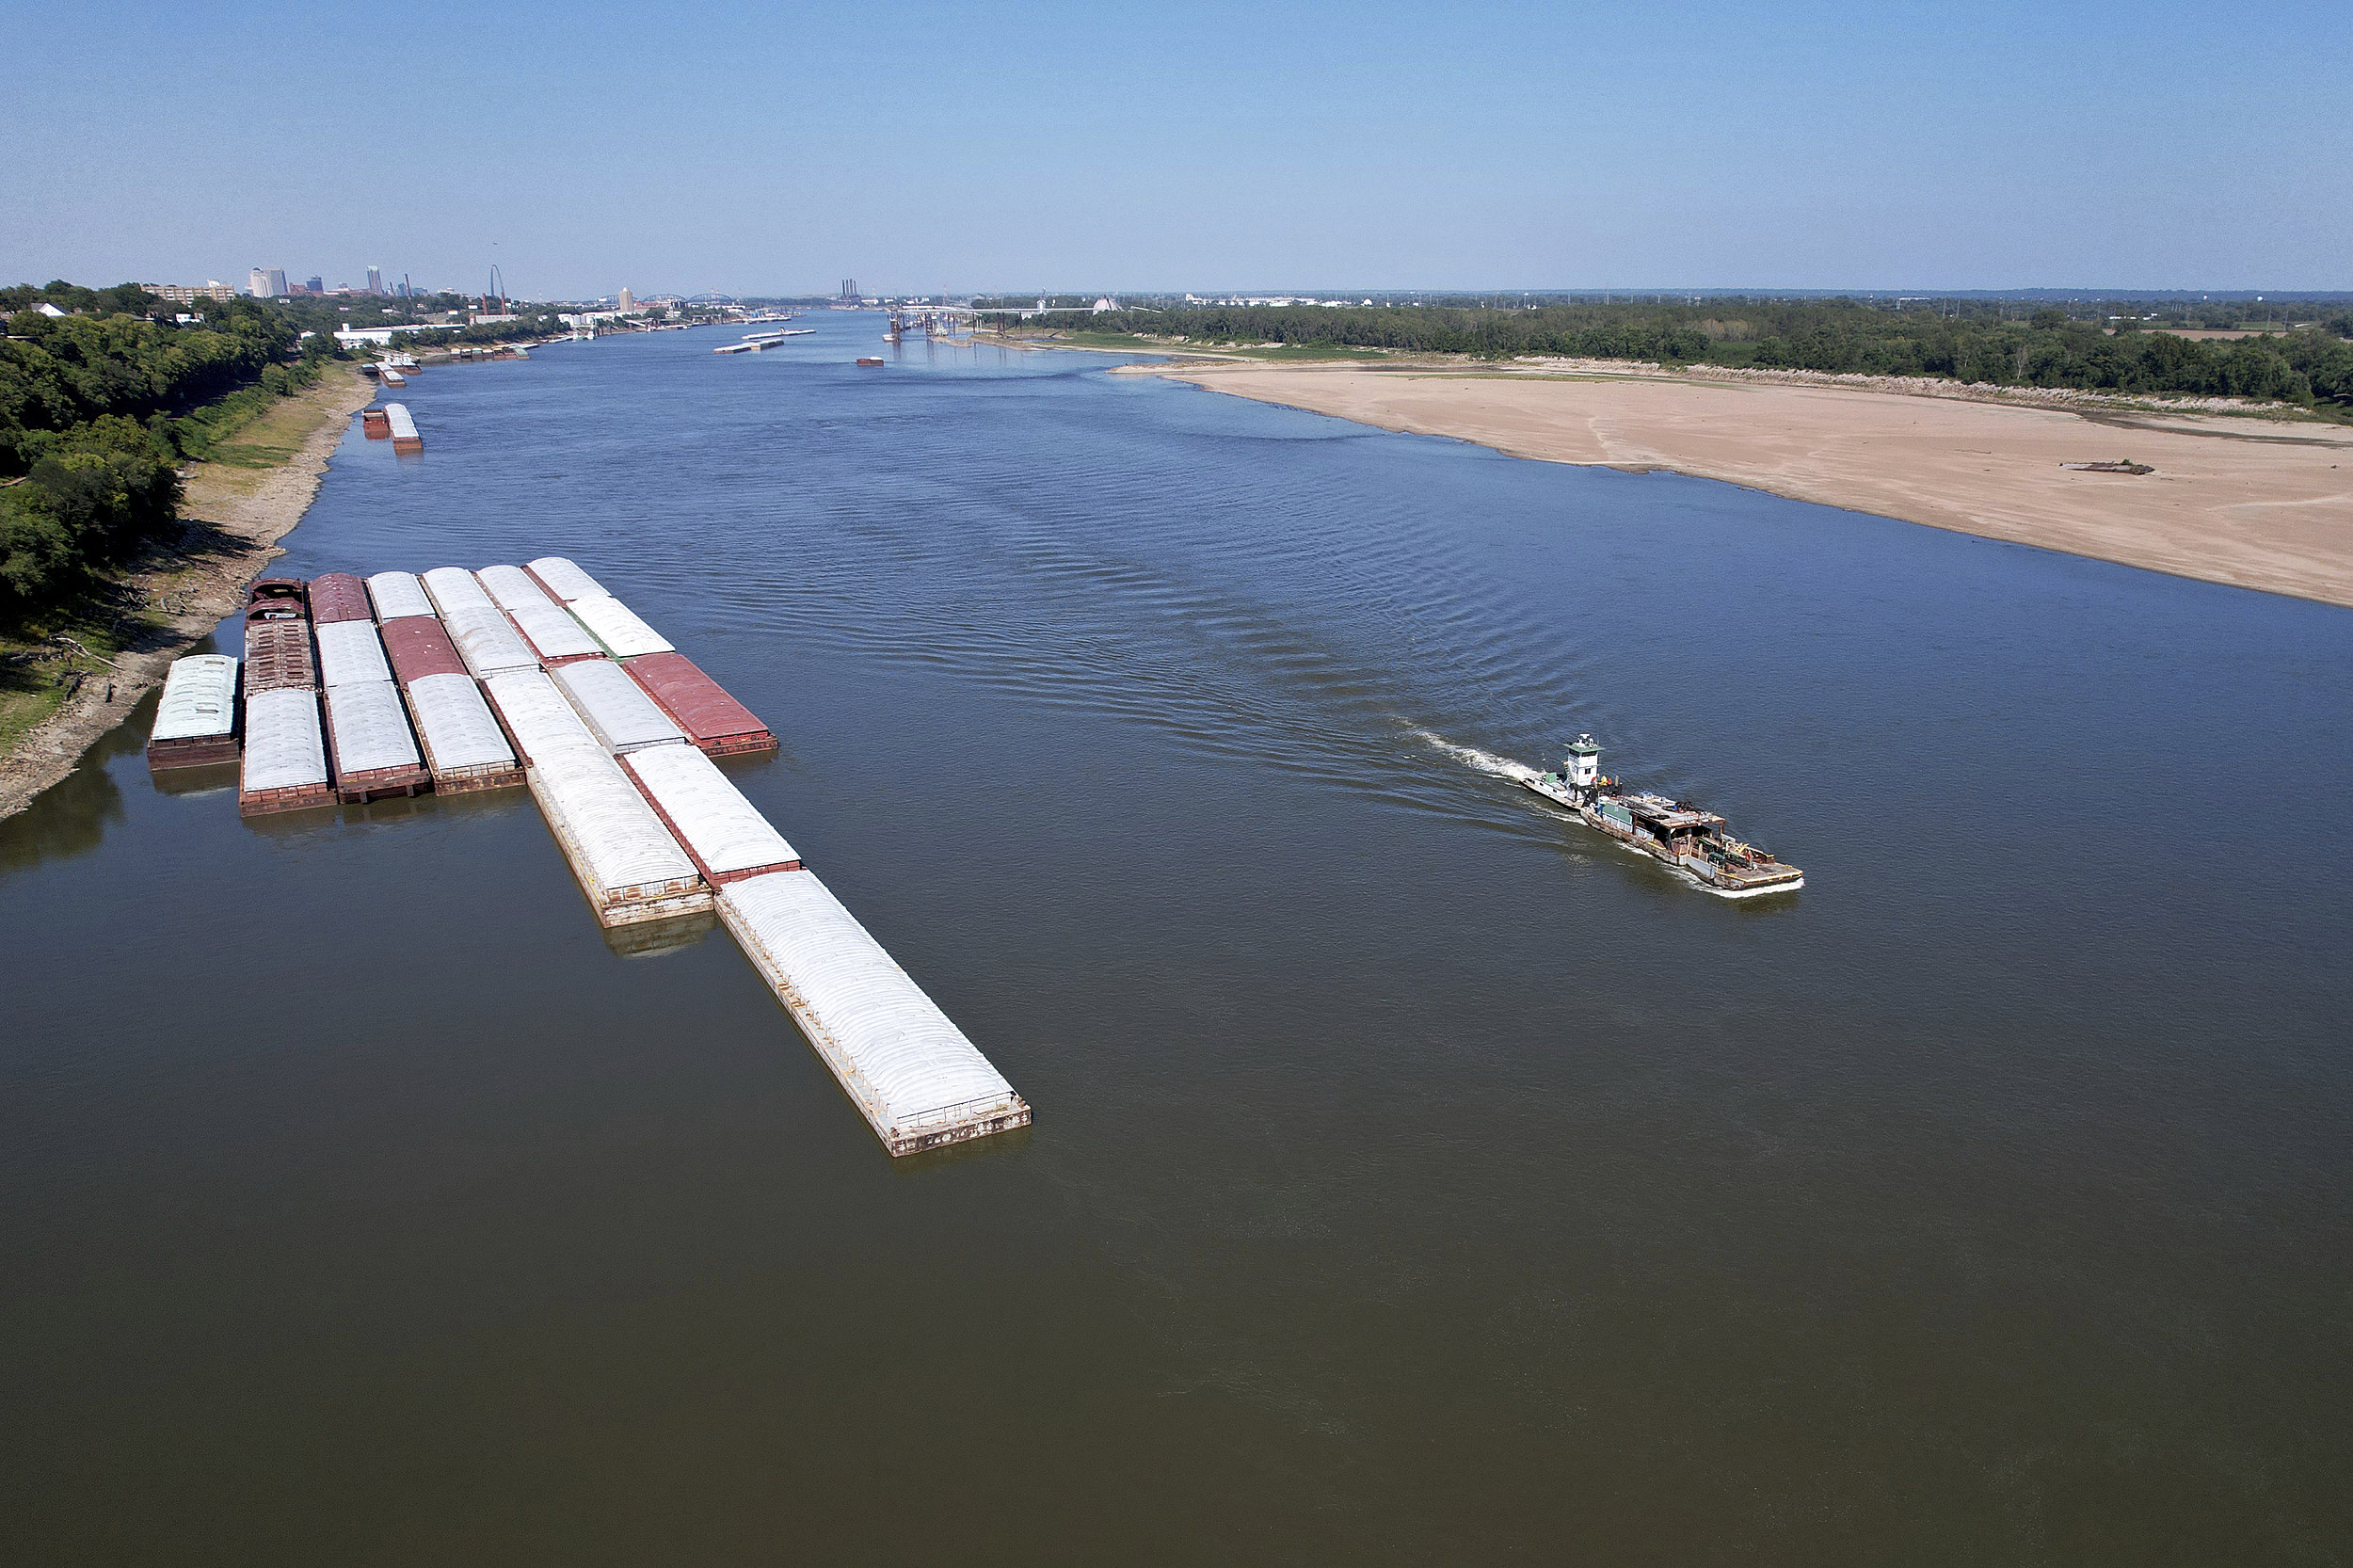 Low Mississippi River limits barges just as farmers want to move their
crops downriver